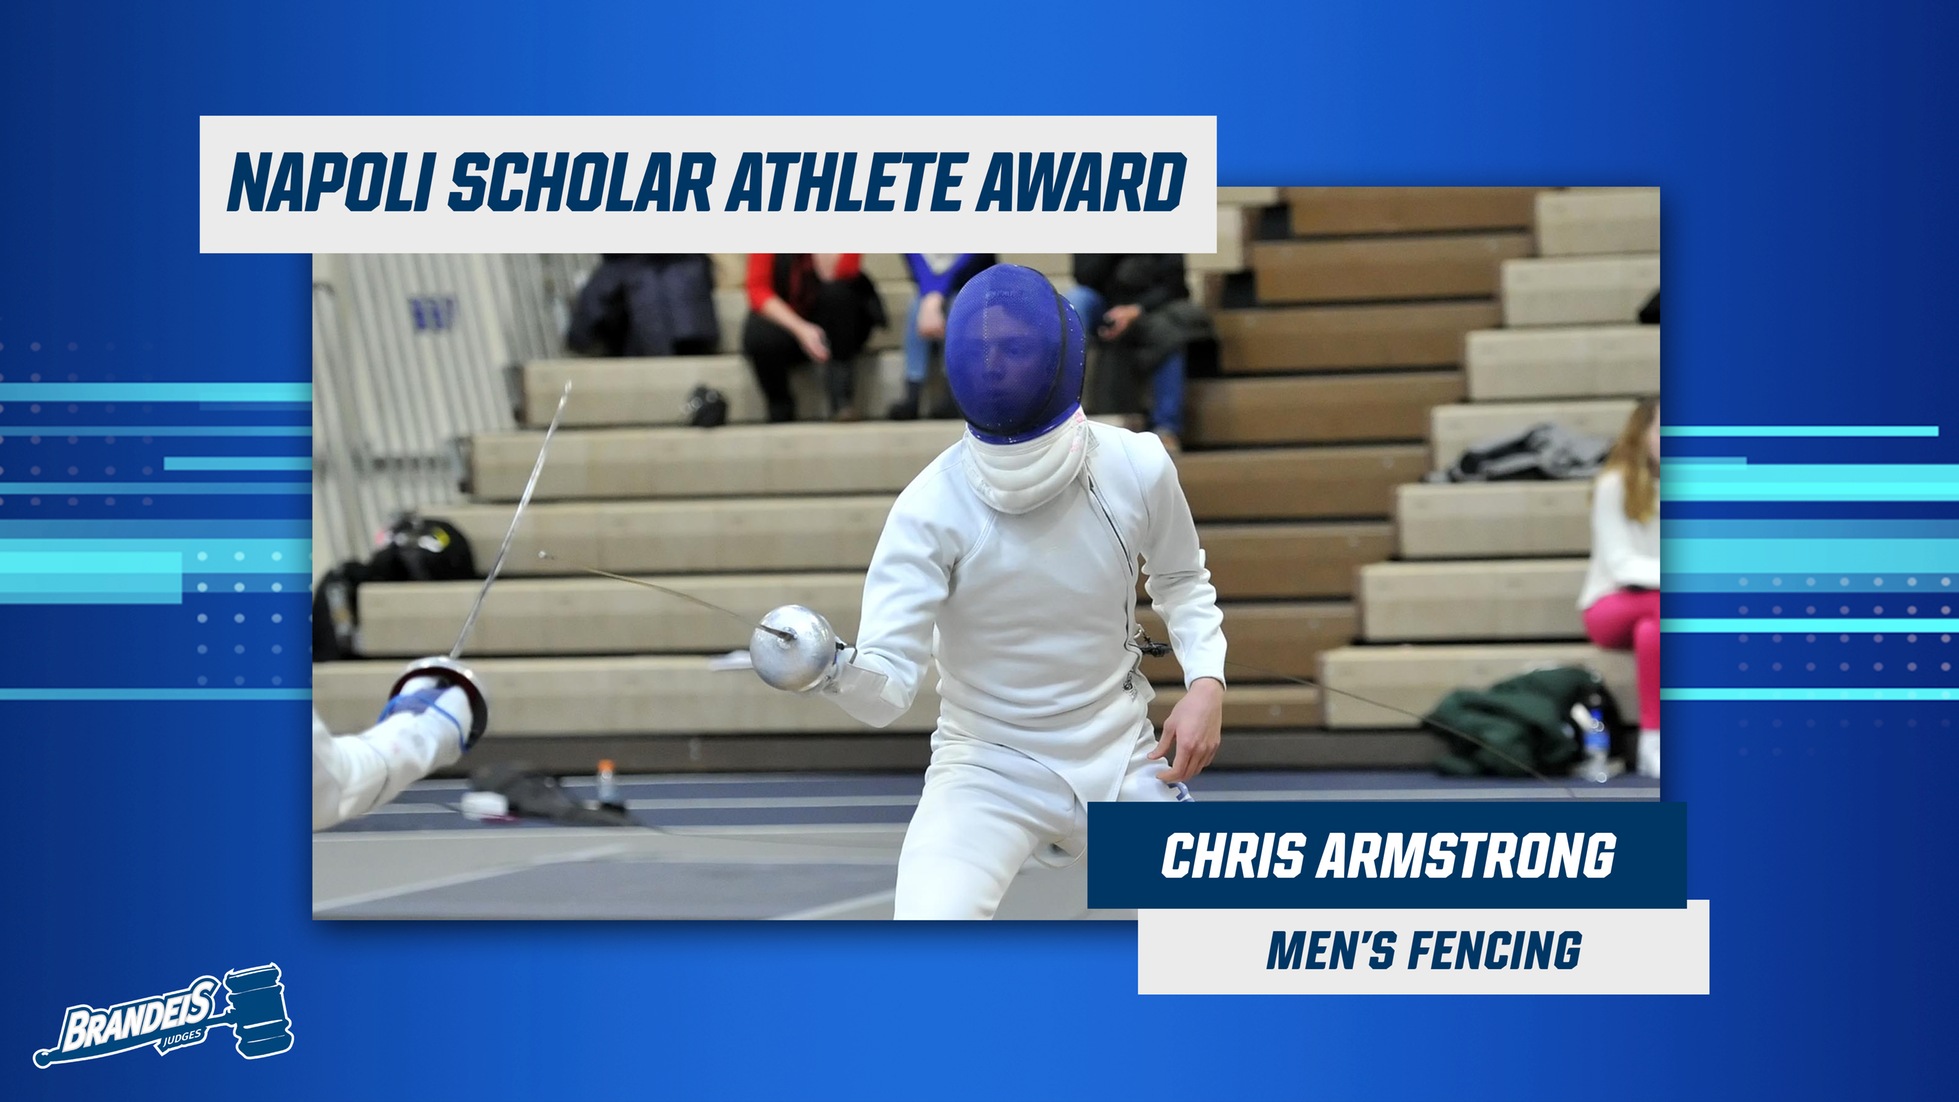 Charlie Napoli '58 Scholar-Athlete Award winner Chris Armstrong fencing epee